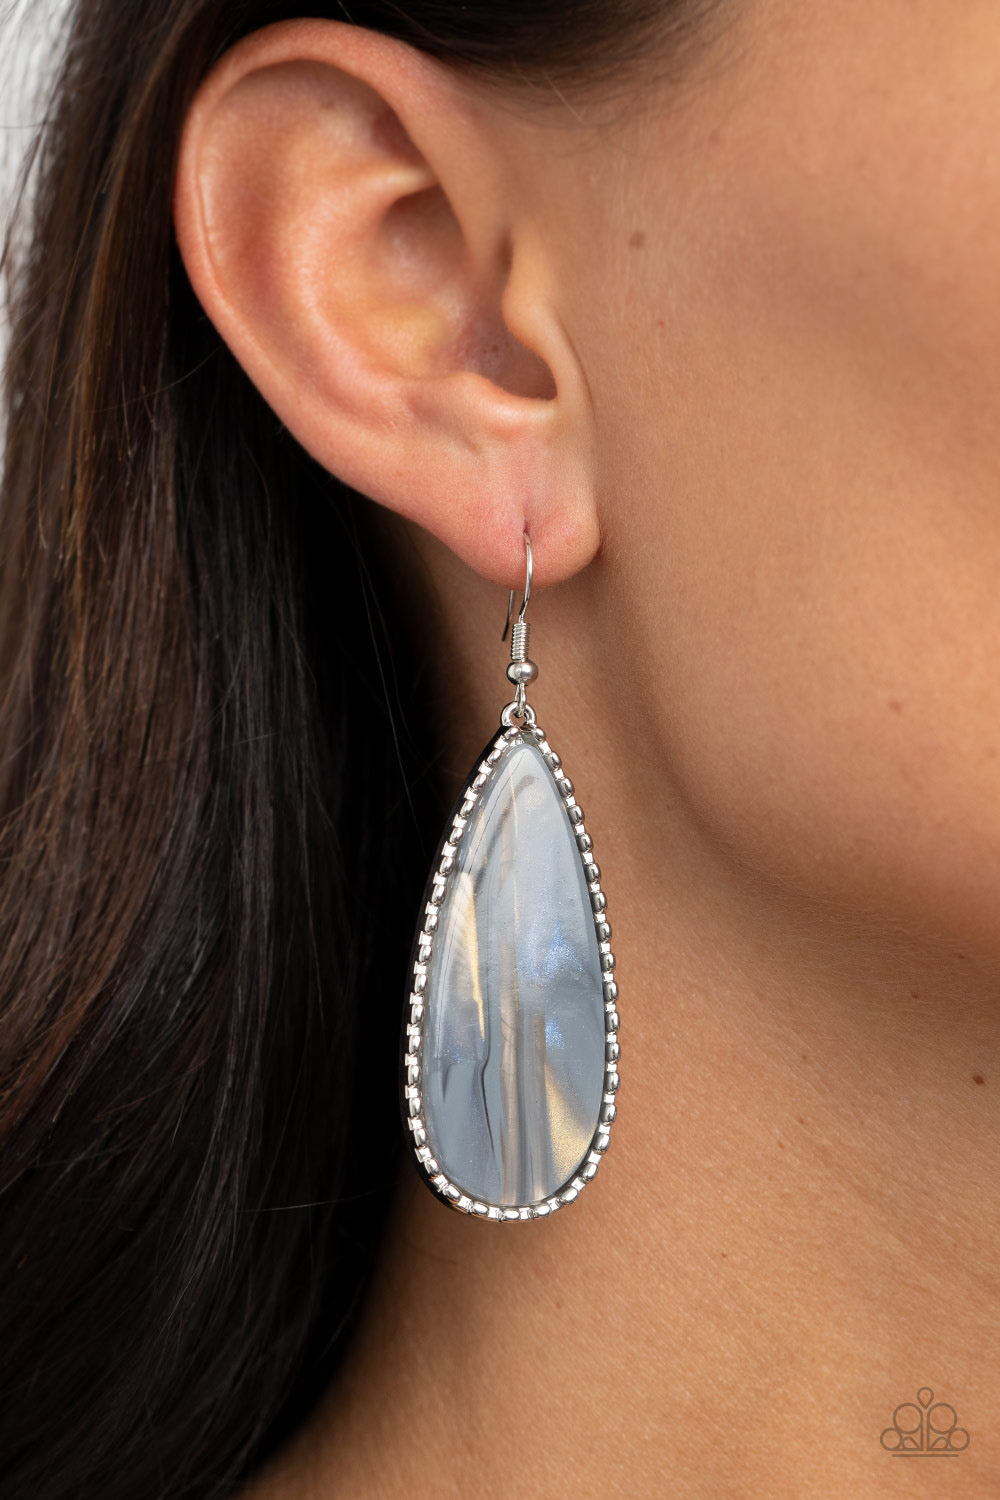 Ethereal Eloquence Earrings - Silver